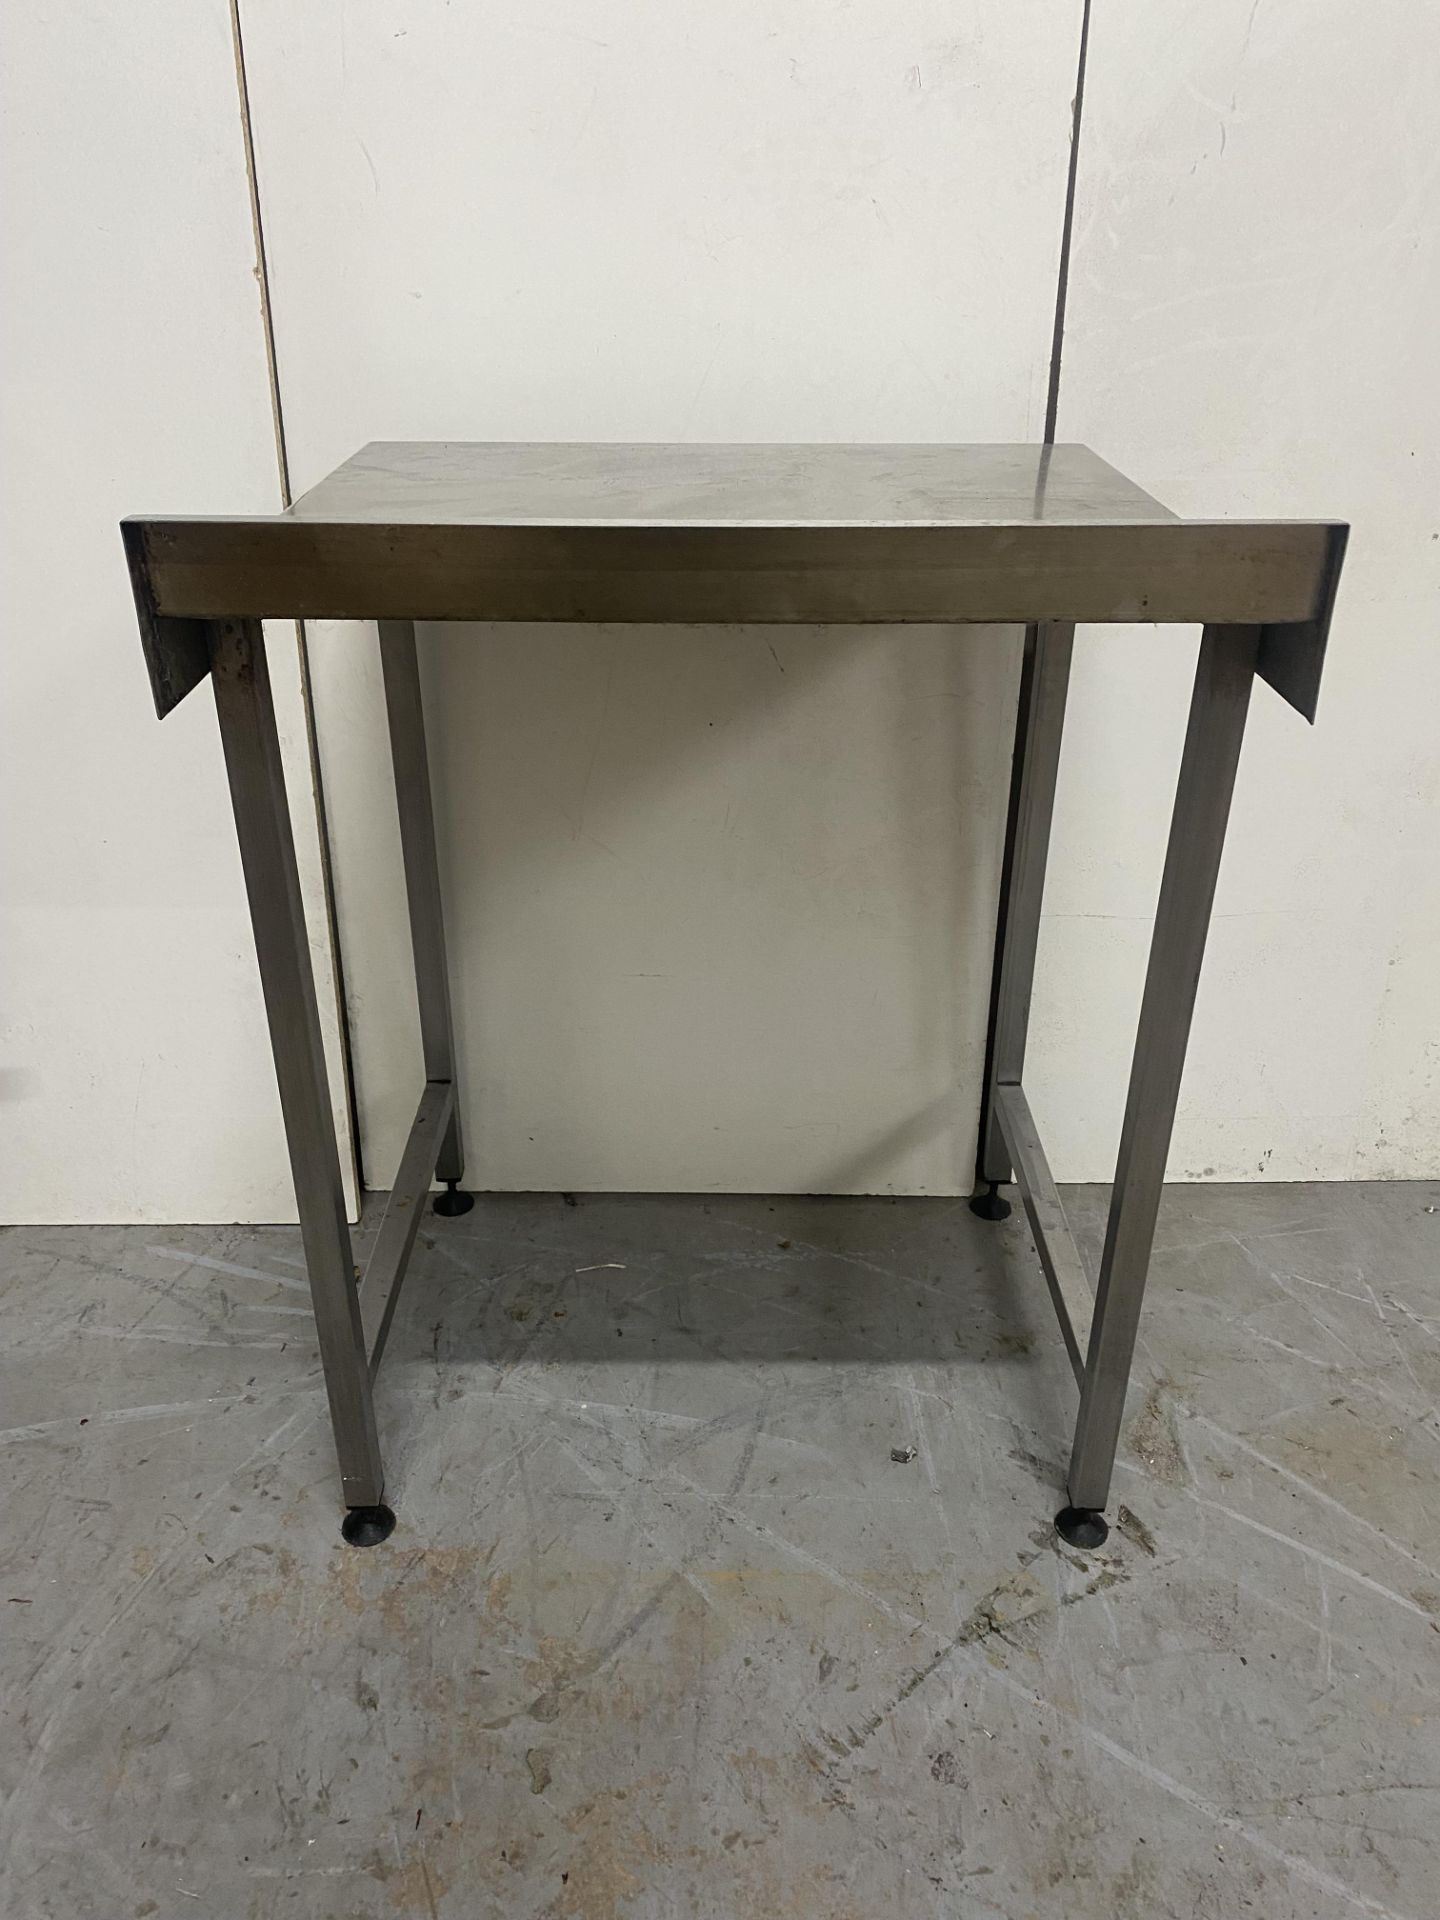 700mm Stainless Steel Catering Preperation Table - Image 5 of 5